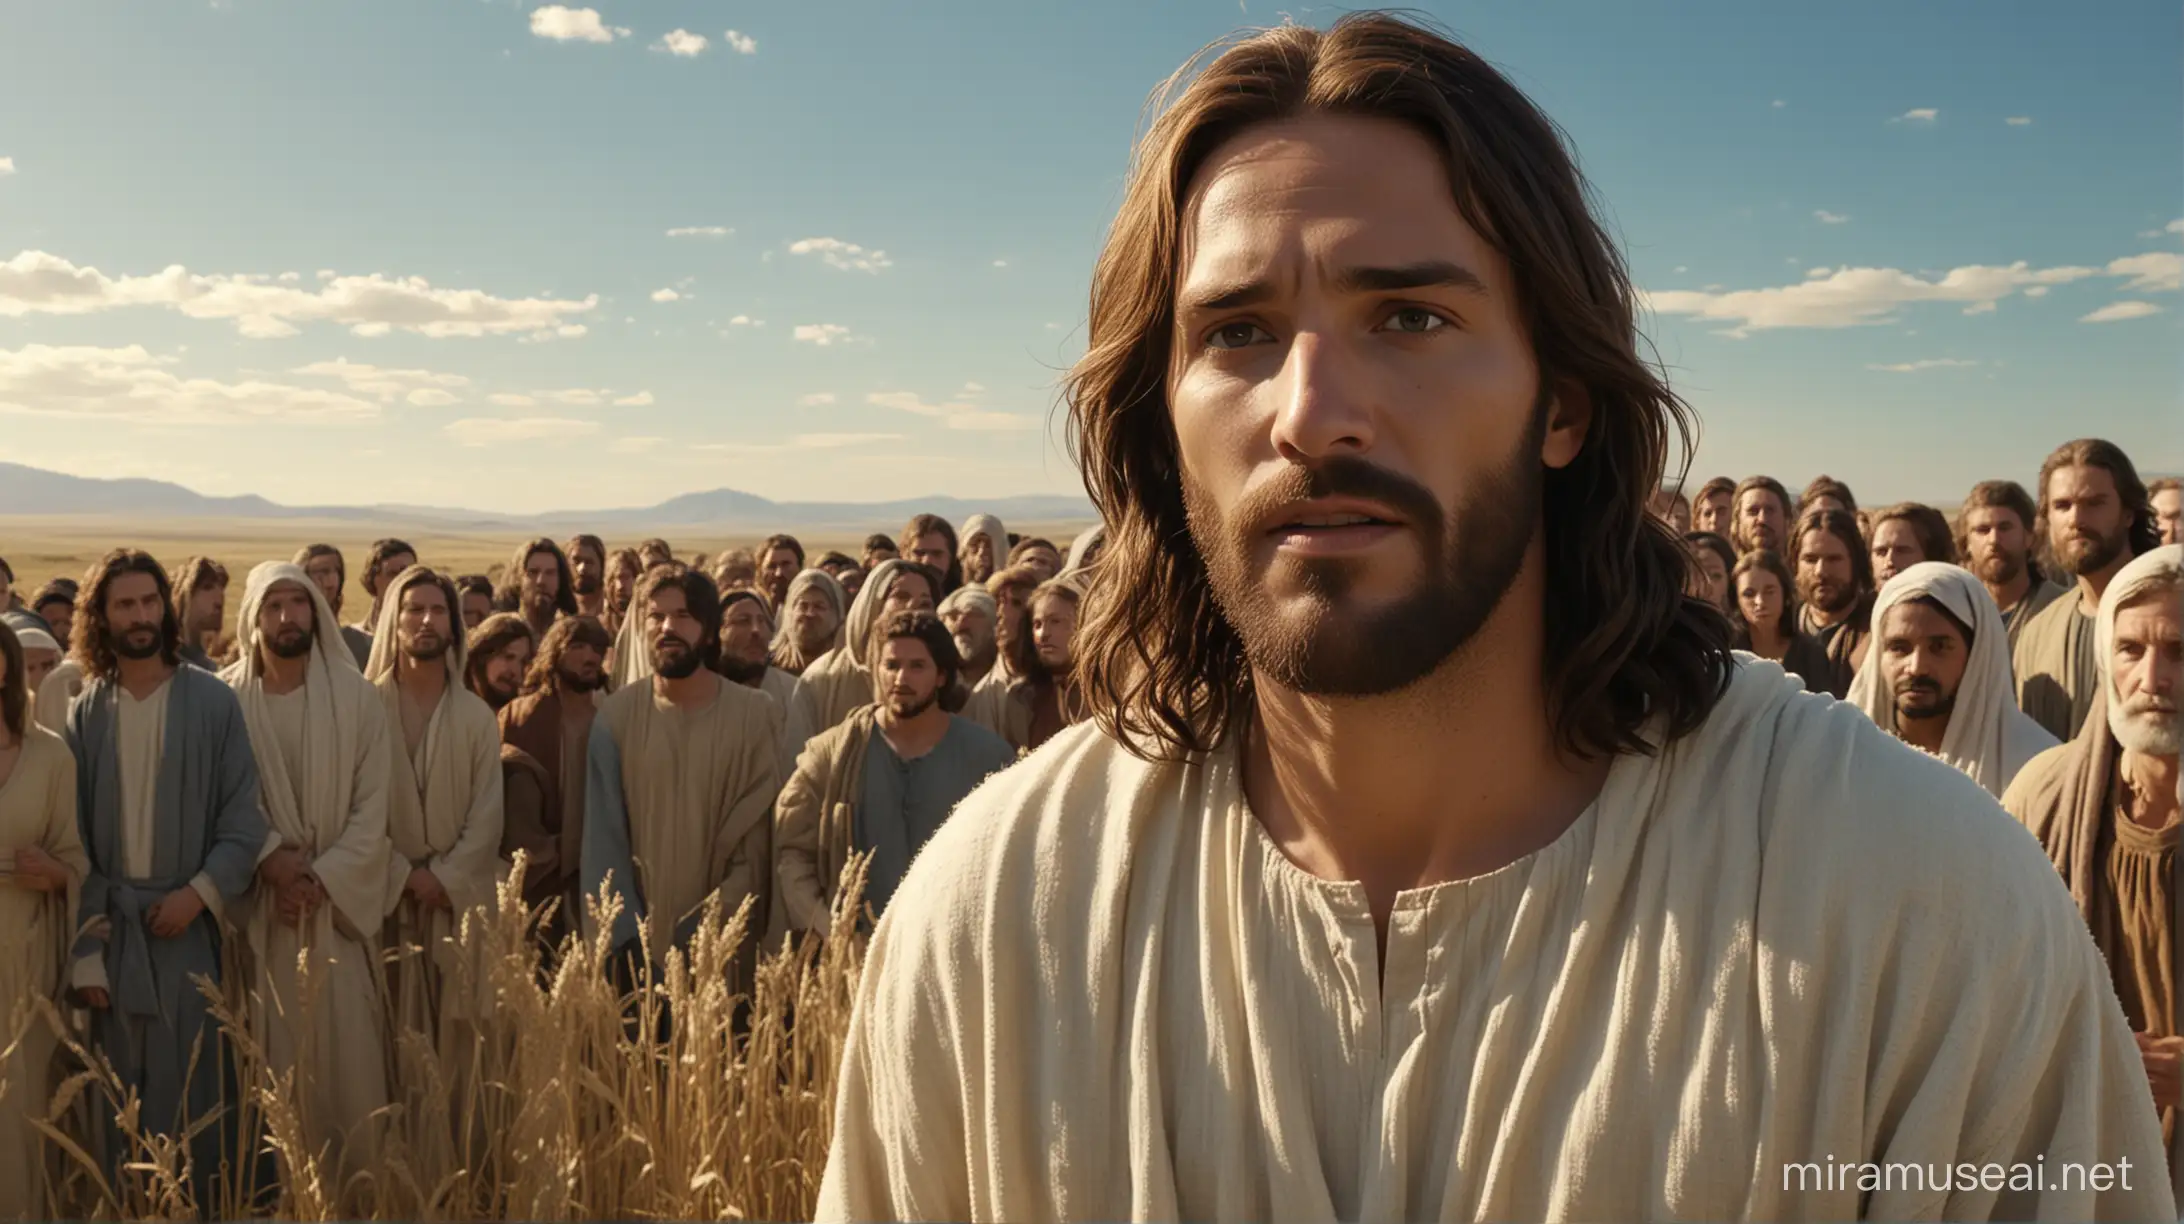 create an image of Jesus in an open field with a group of people listening to him speak, under a serene blue and sunny sky. 6k resolution, more realistic, based on the movie The Passion of the Christ.